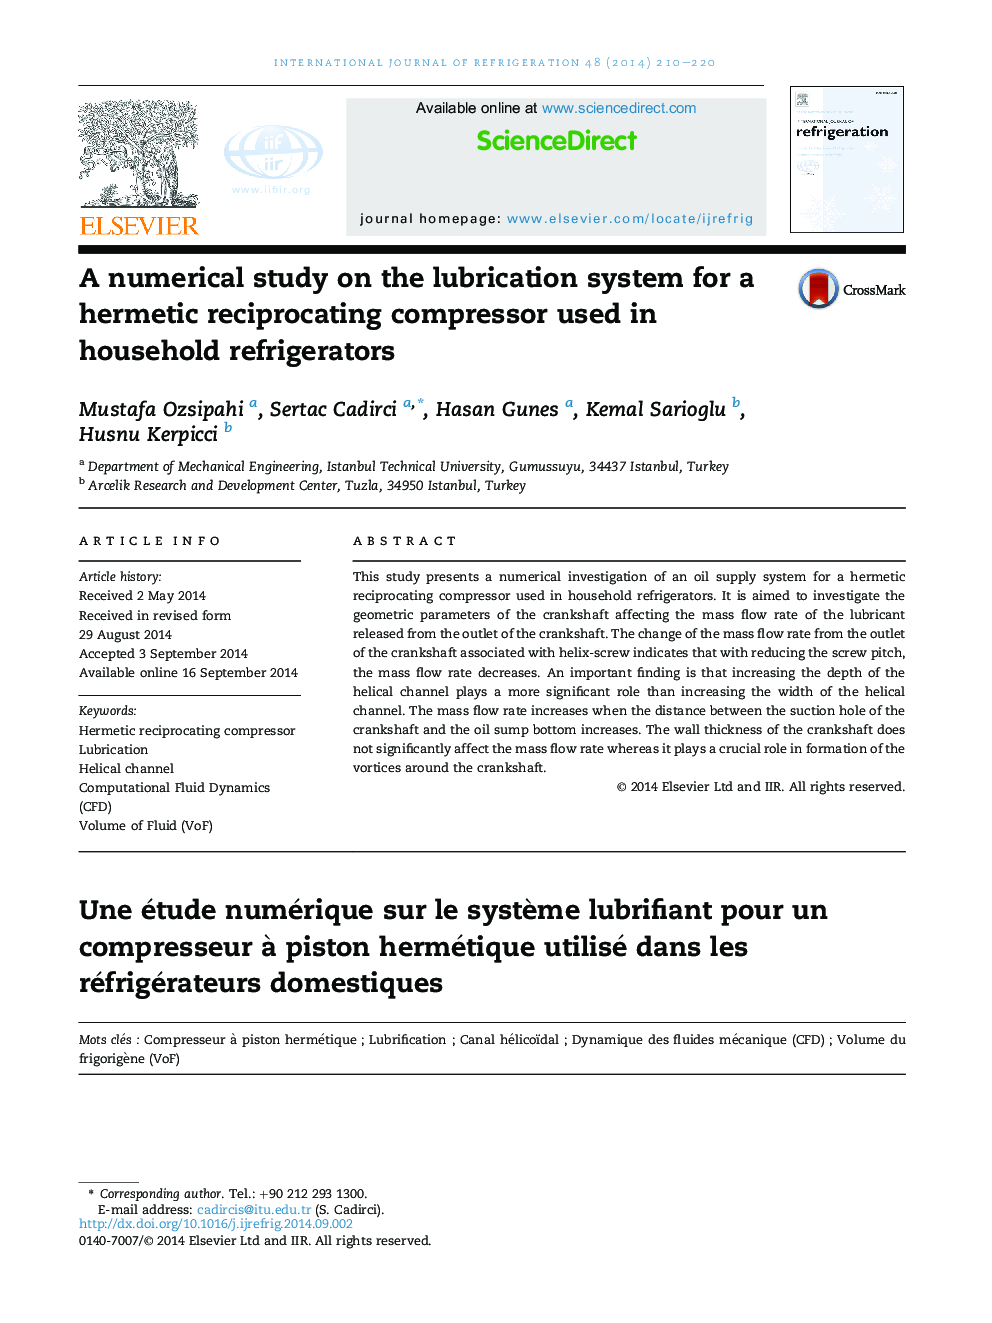 A numerical study on the lubrication system for a hermetic reciprocating compressor used in household refrigerators